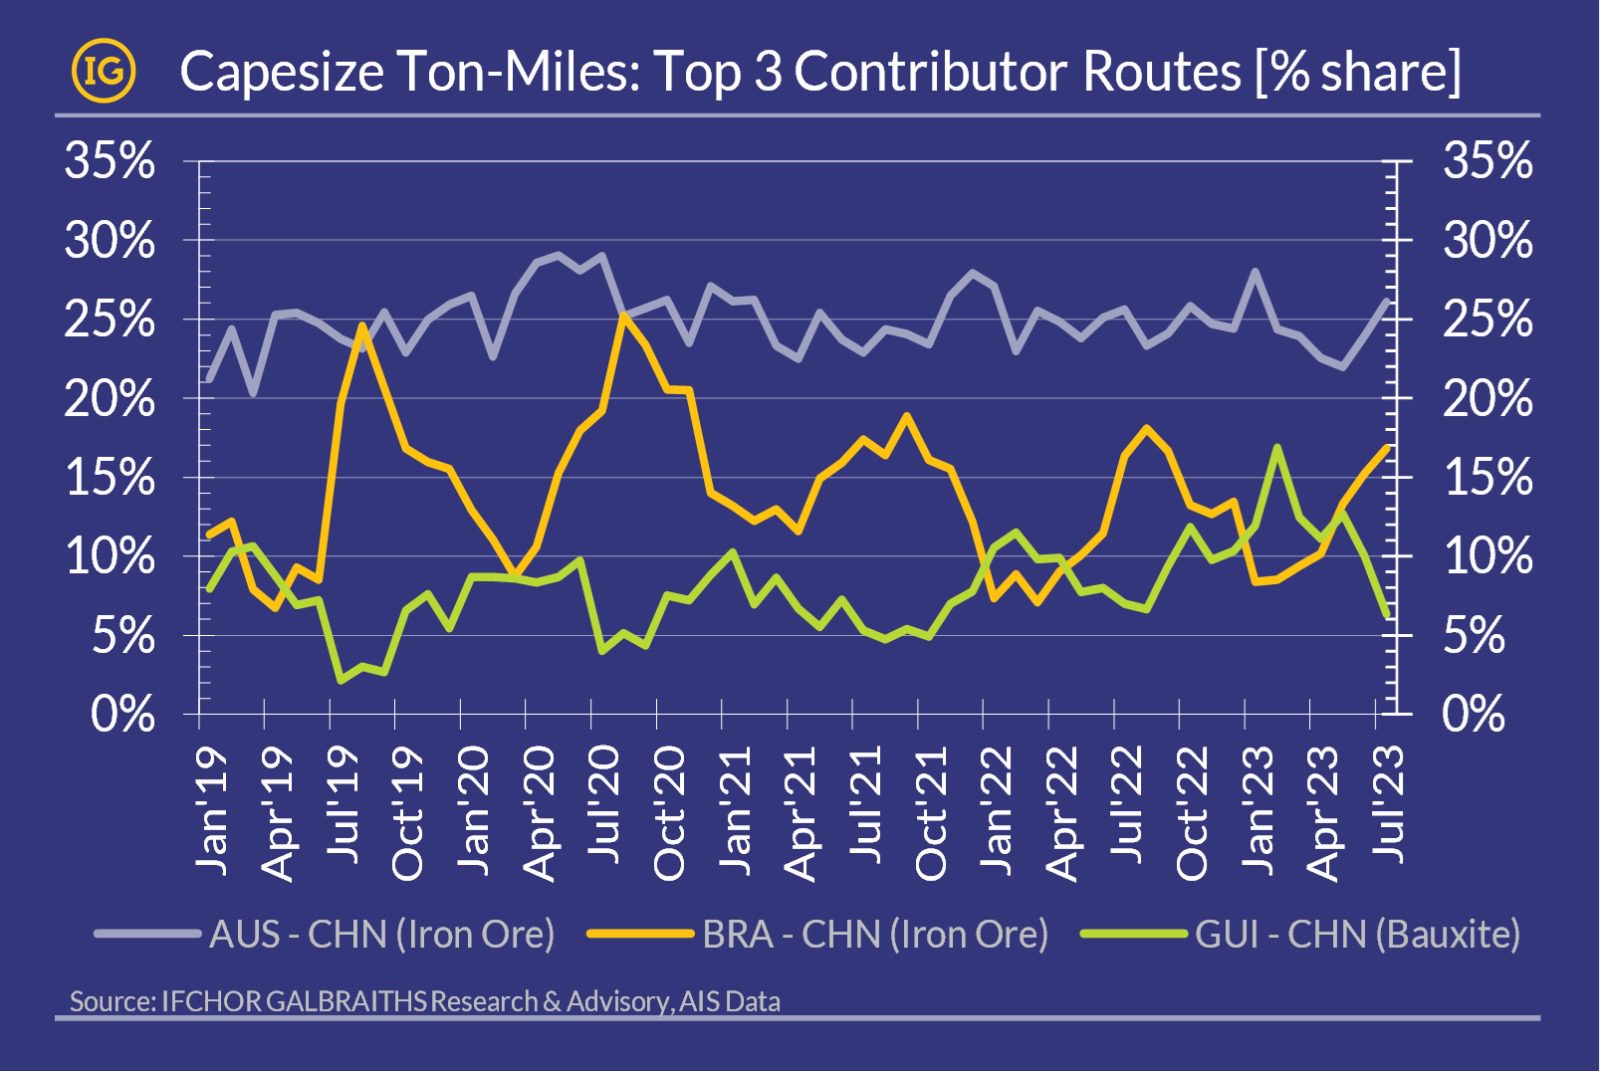 Top-3 routes for Capesize vessels